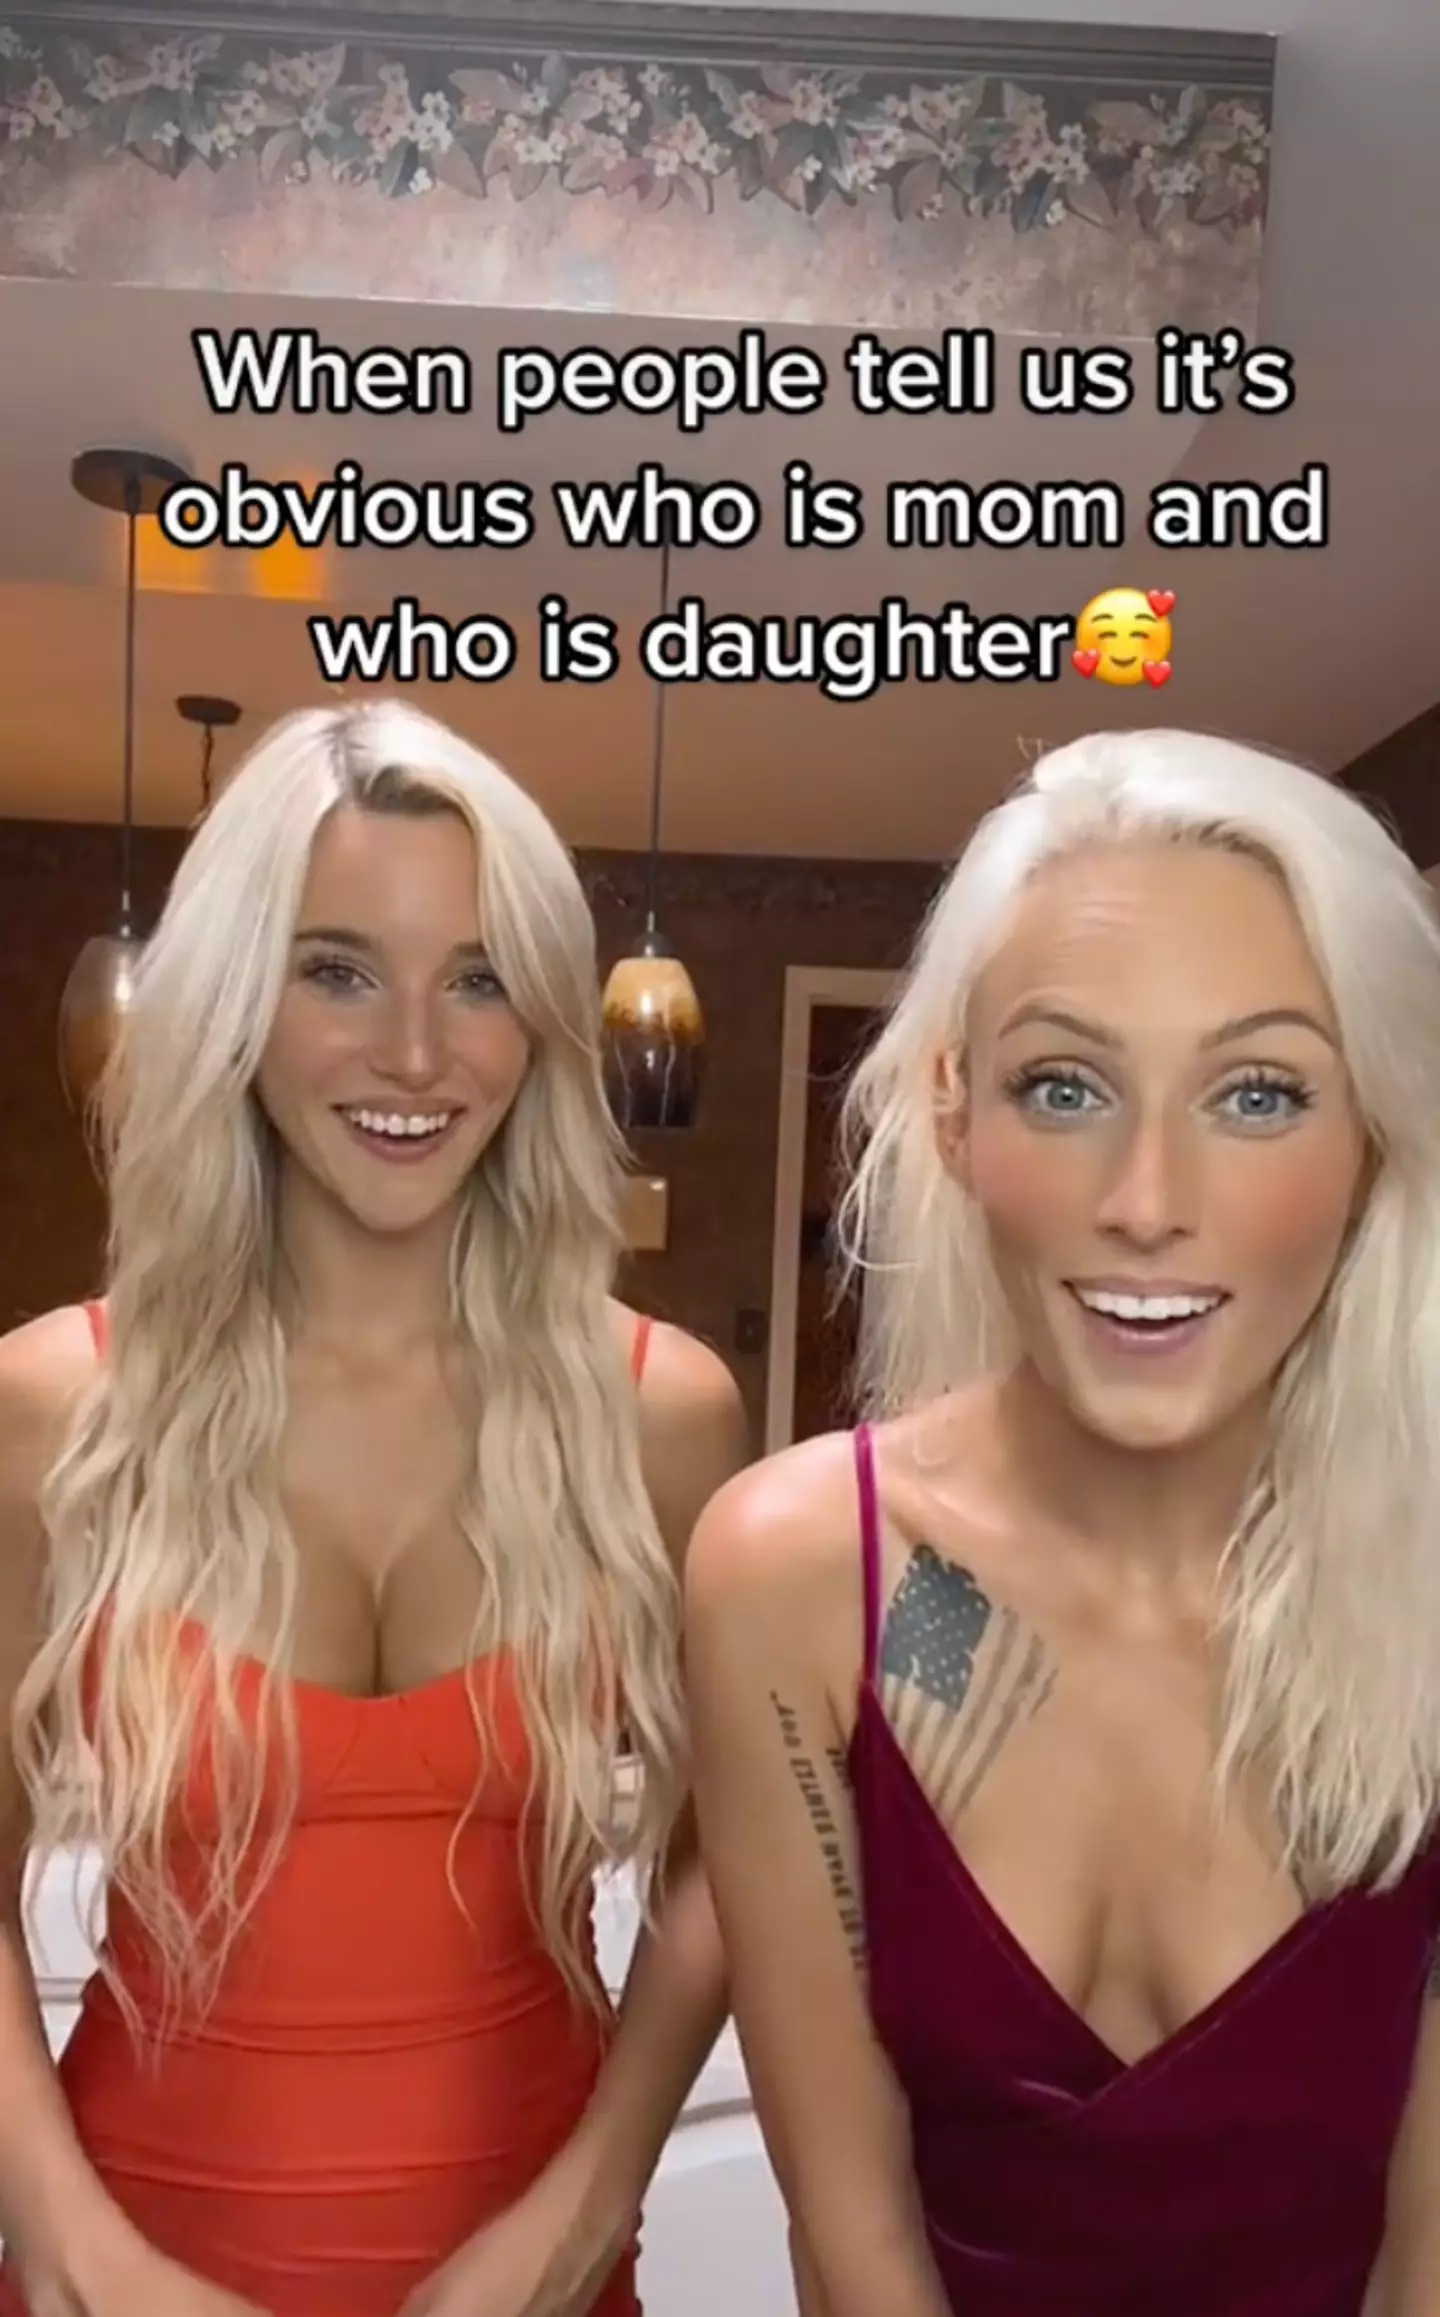 The mum and daughter responded to their viewer's answers.